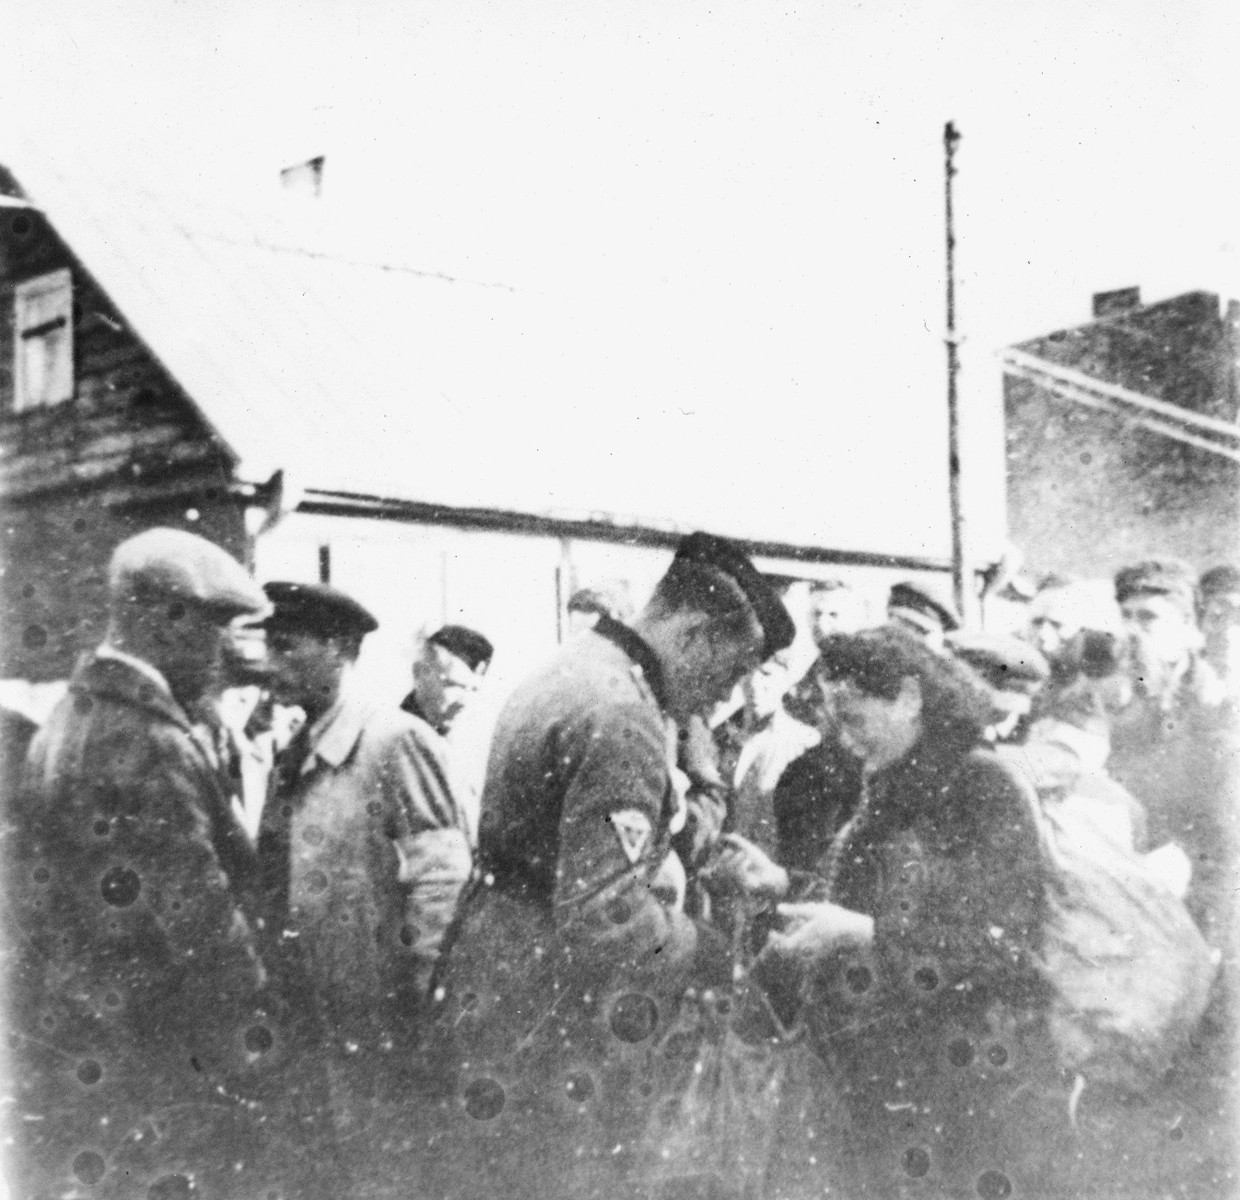 Kovno workers are searched by ghetto police at the Krisciukaicio Street entrance upon their return from forced labor outside the ghetto.